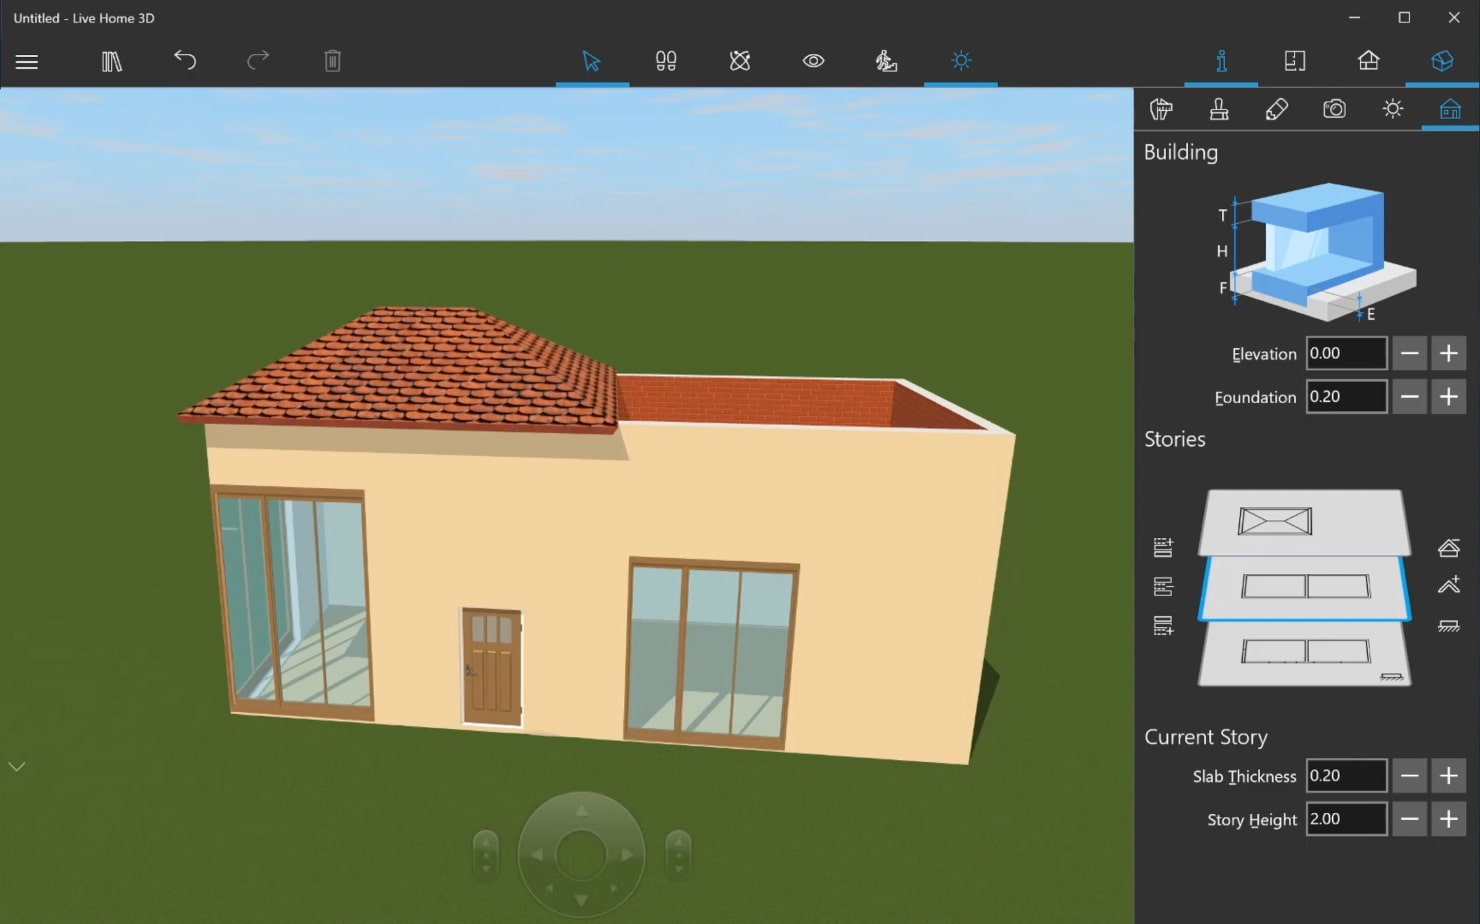  A screenshot demonstrating how to add the house roof in Live Home 3D.